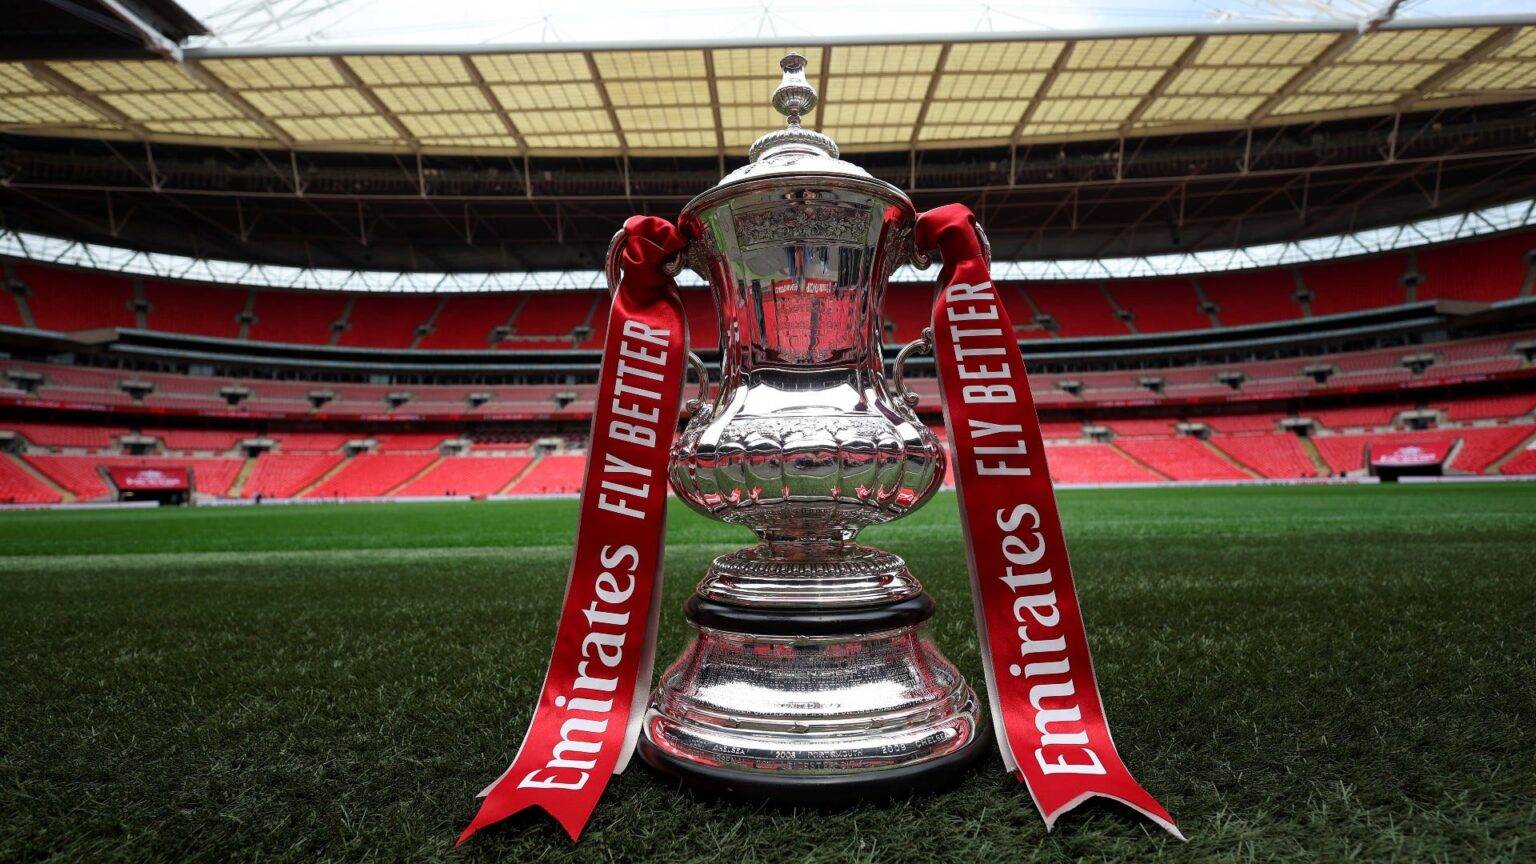 FA Cup fixtures this weekend- 16/03 – Liverpool take on Man Utd